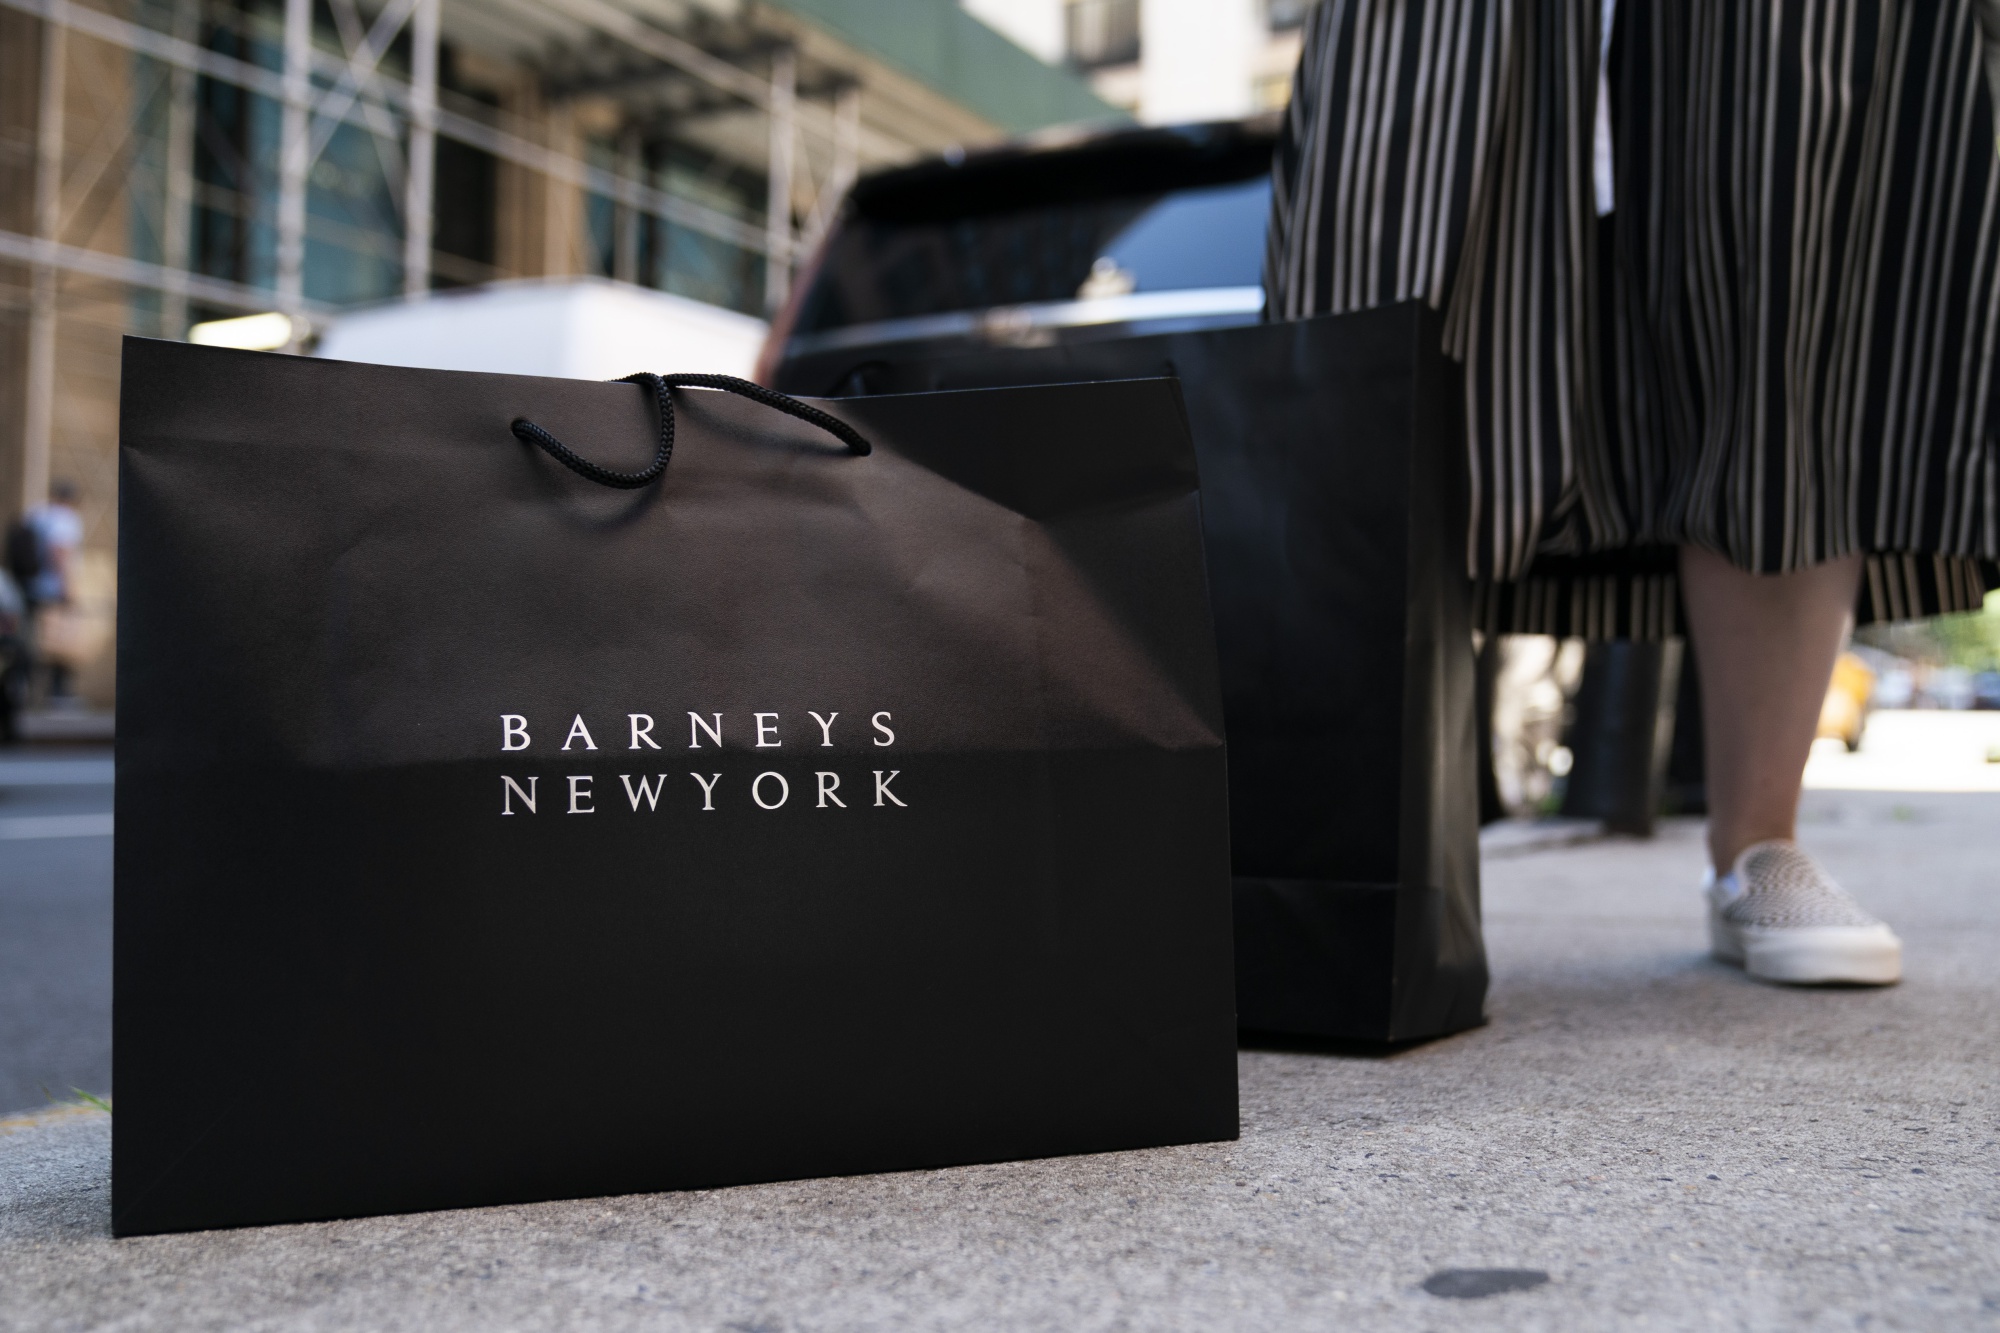 Barneys New York, the Beloved Retailer, Files For Bankruptcy